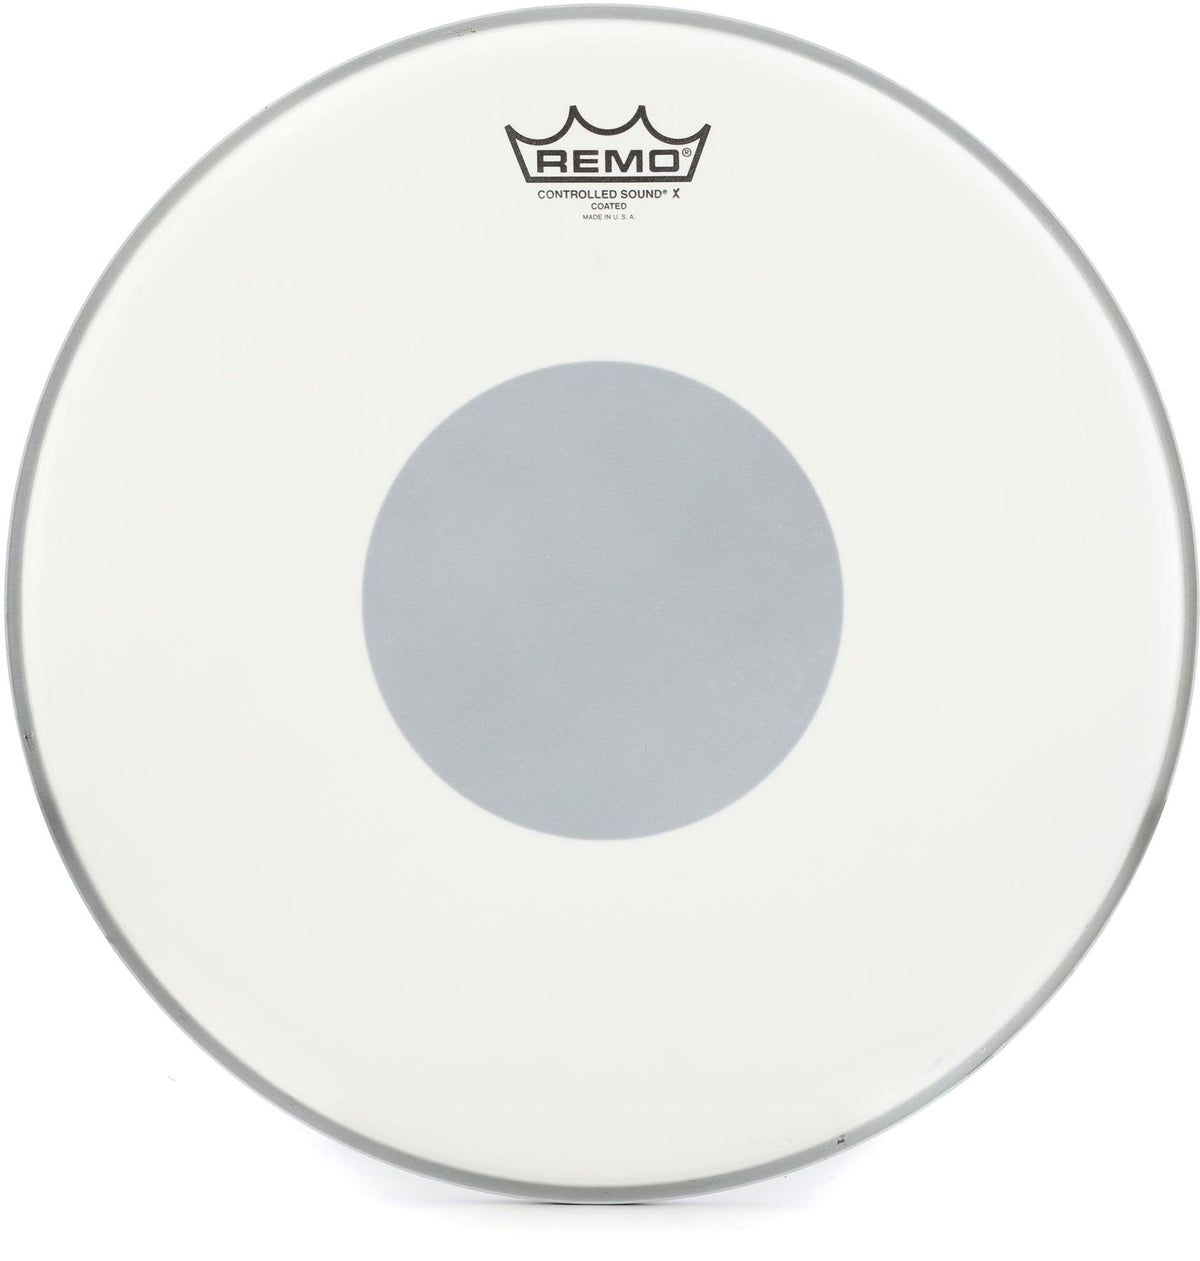 Mặt Trống Remo CX-0114-10 14inch Controlled Sound X Drum Head-Việt Music